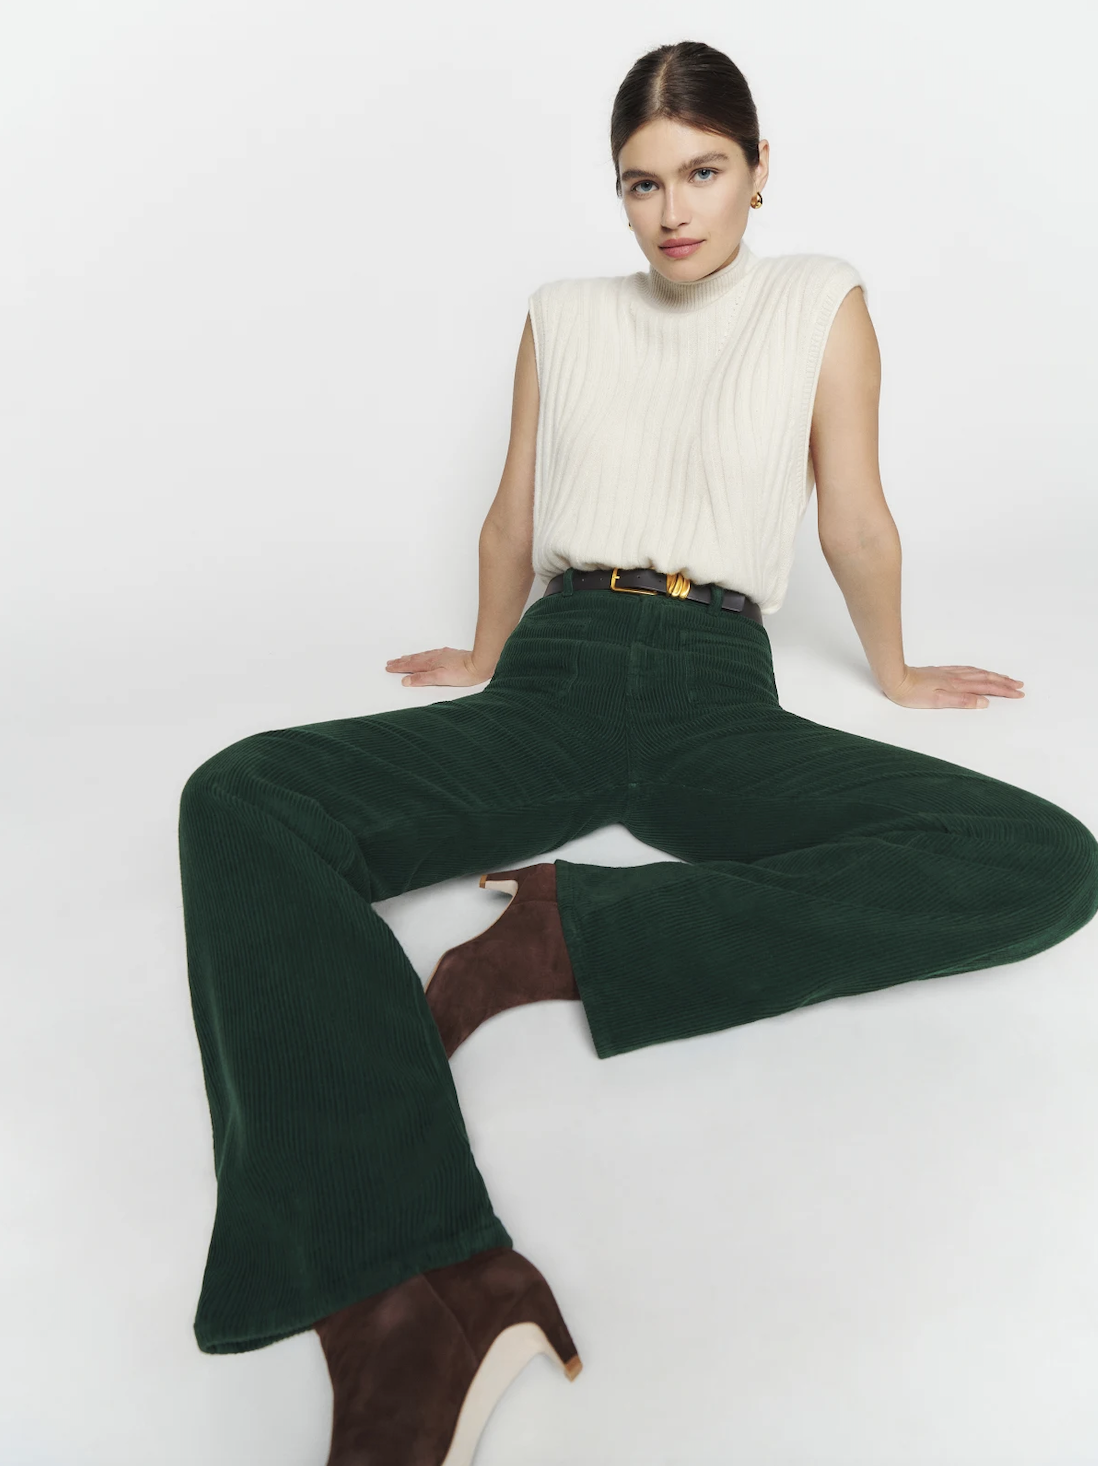  Other Stories cotton stretch corduroy pants in off white  CREAM  ASOS